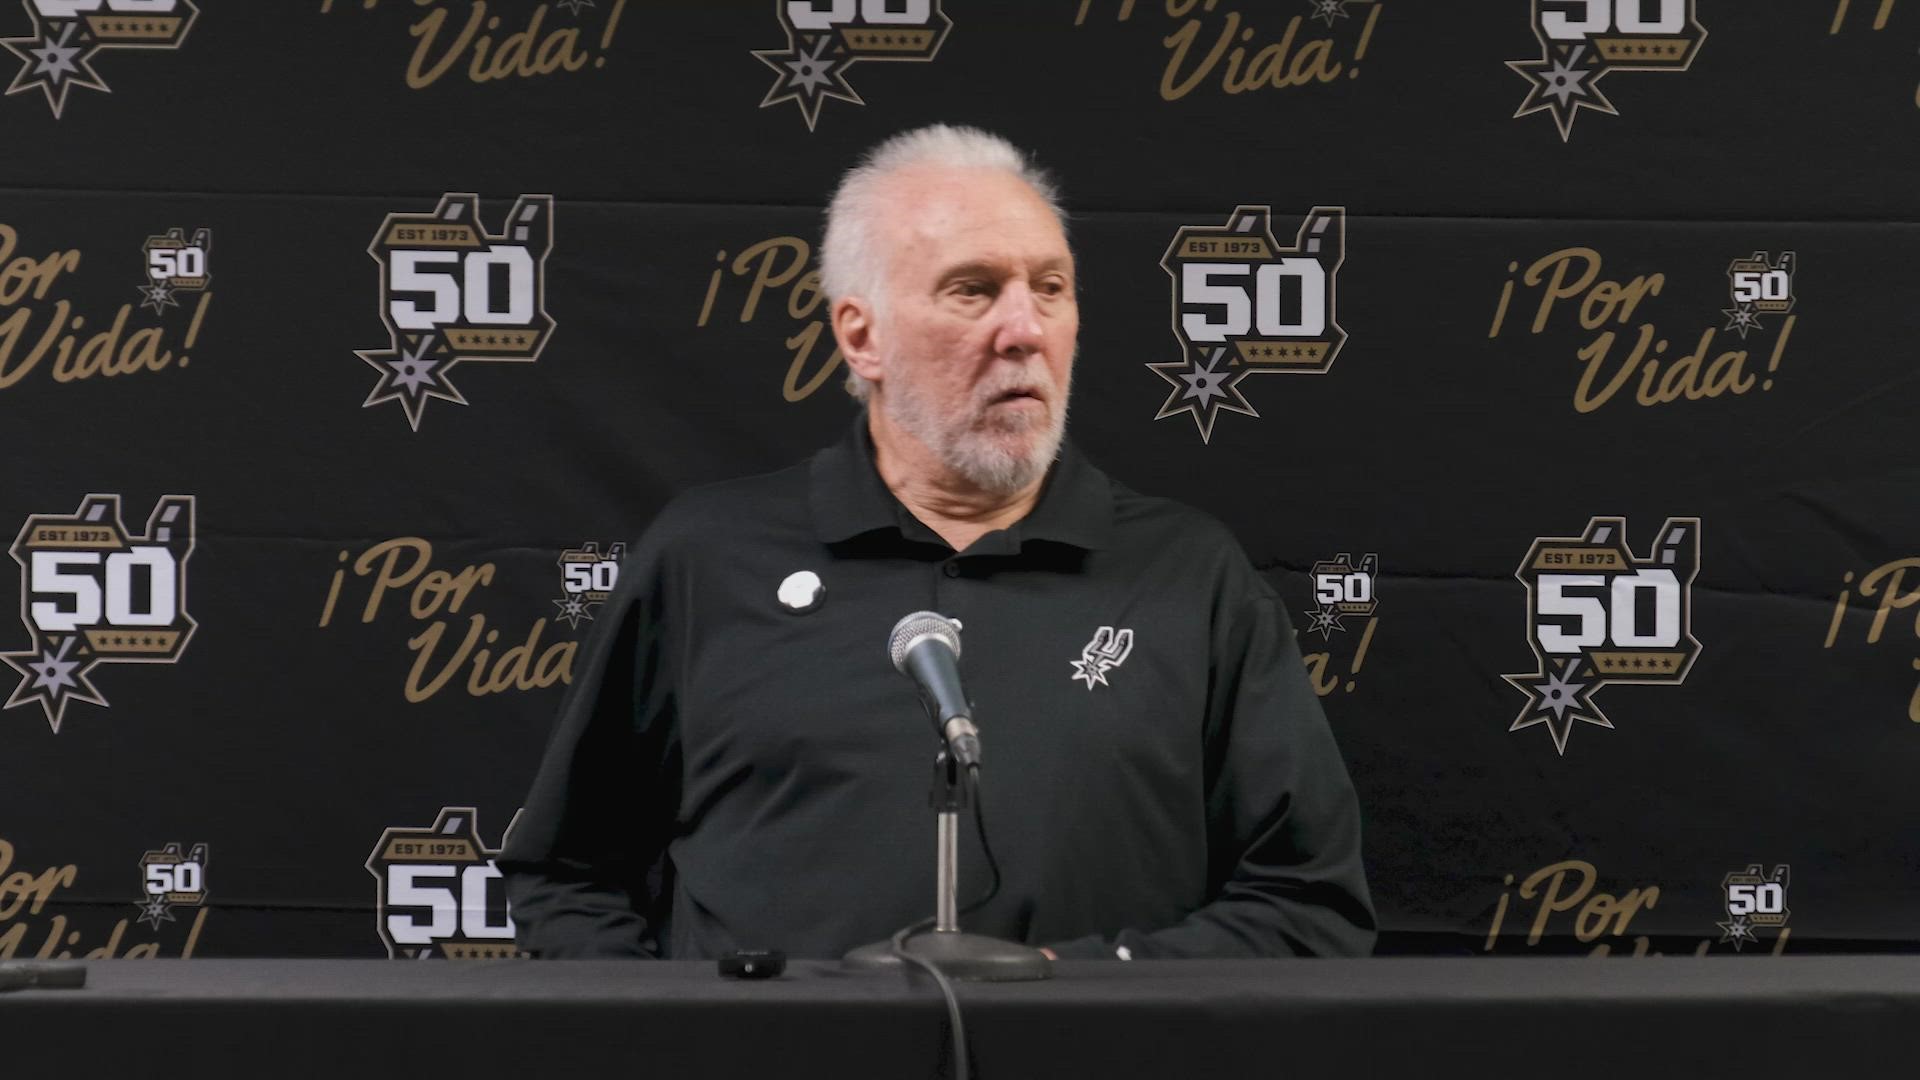 Pop said it's going to be a long process for his young group, and physicality needs to improve. He also had jokes about Manu Ginobili, who was honored at halftime.